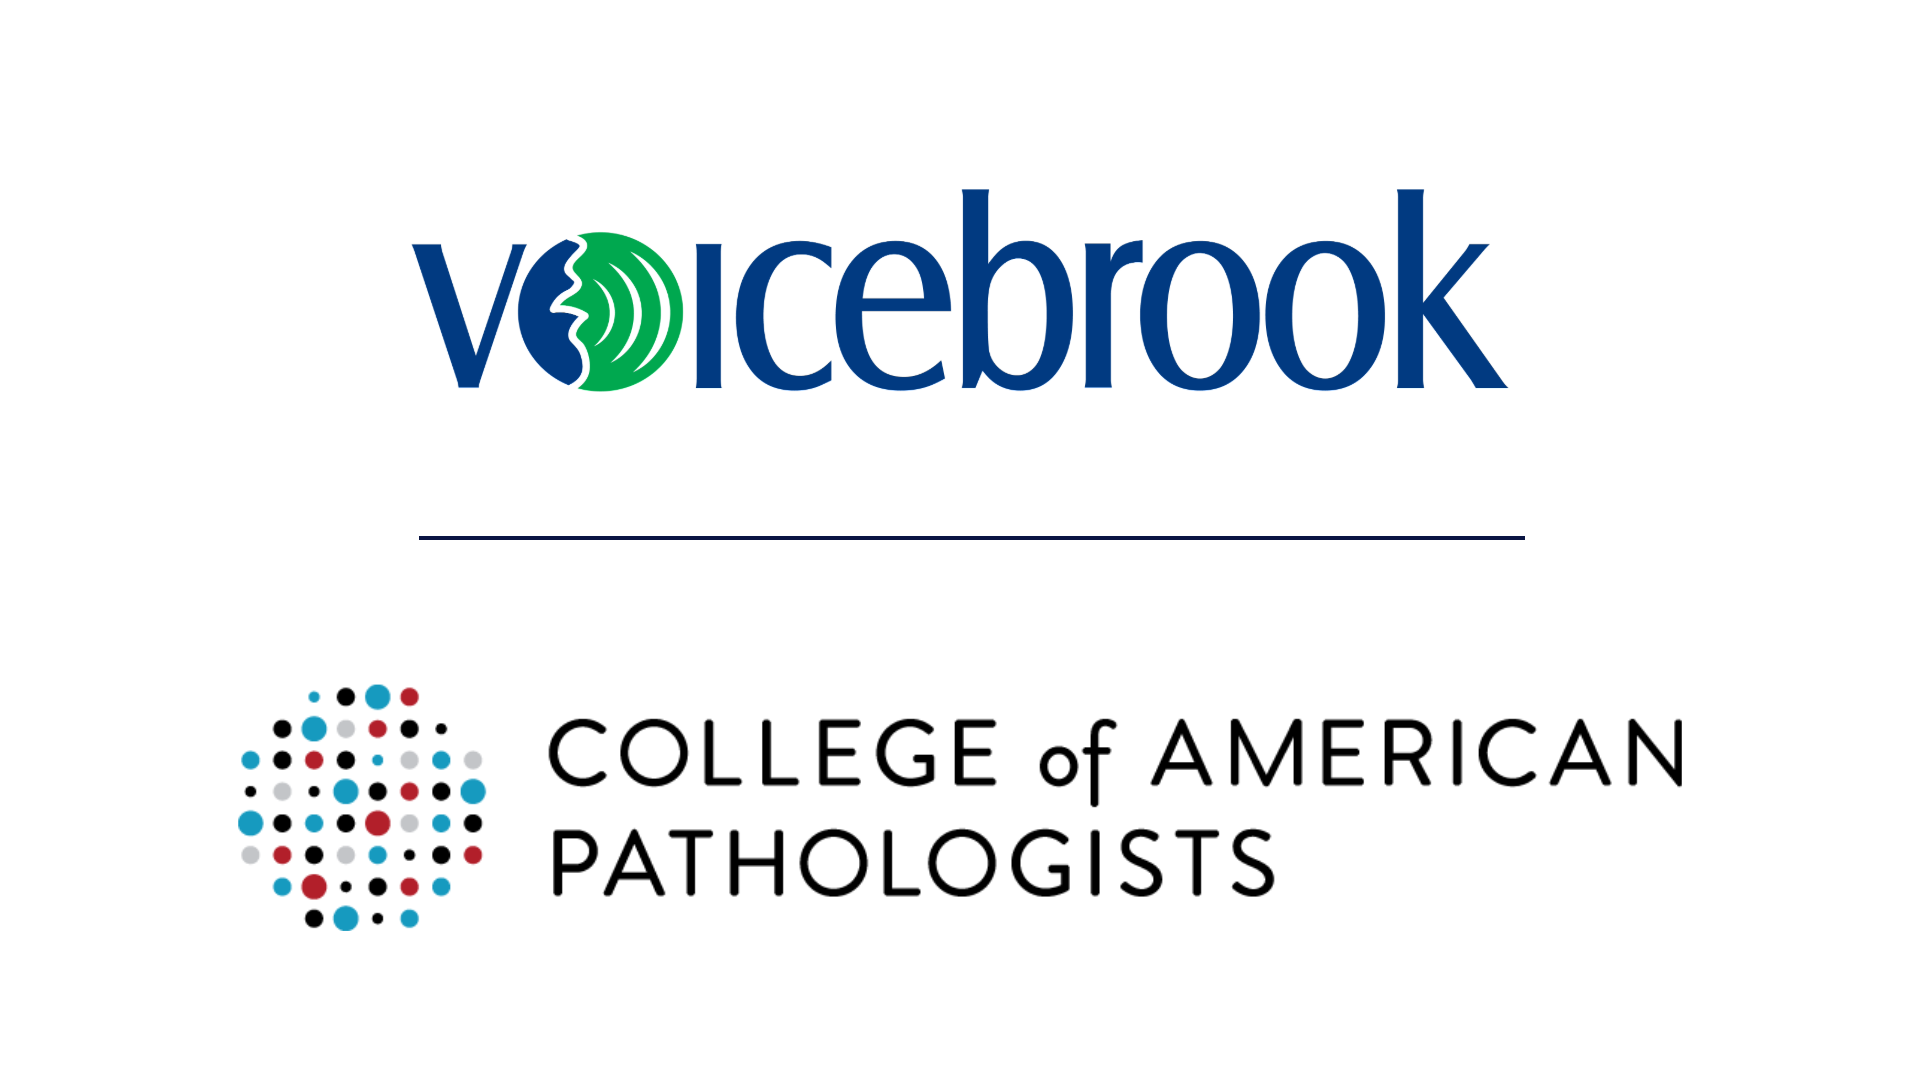 LIVE WEBINAR EVENT: Join Voicebrook and The College of American Pathologists for CAP eCP Discussion